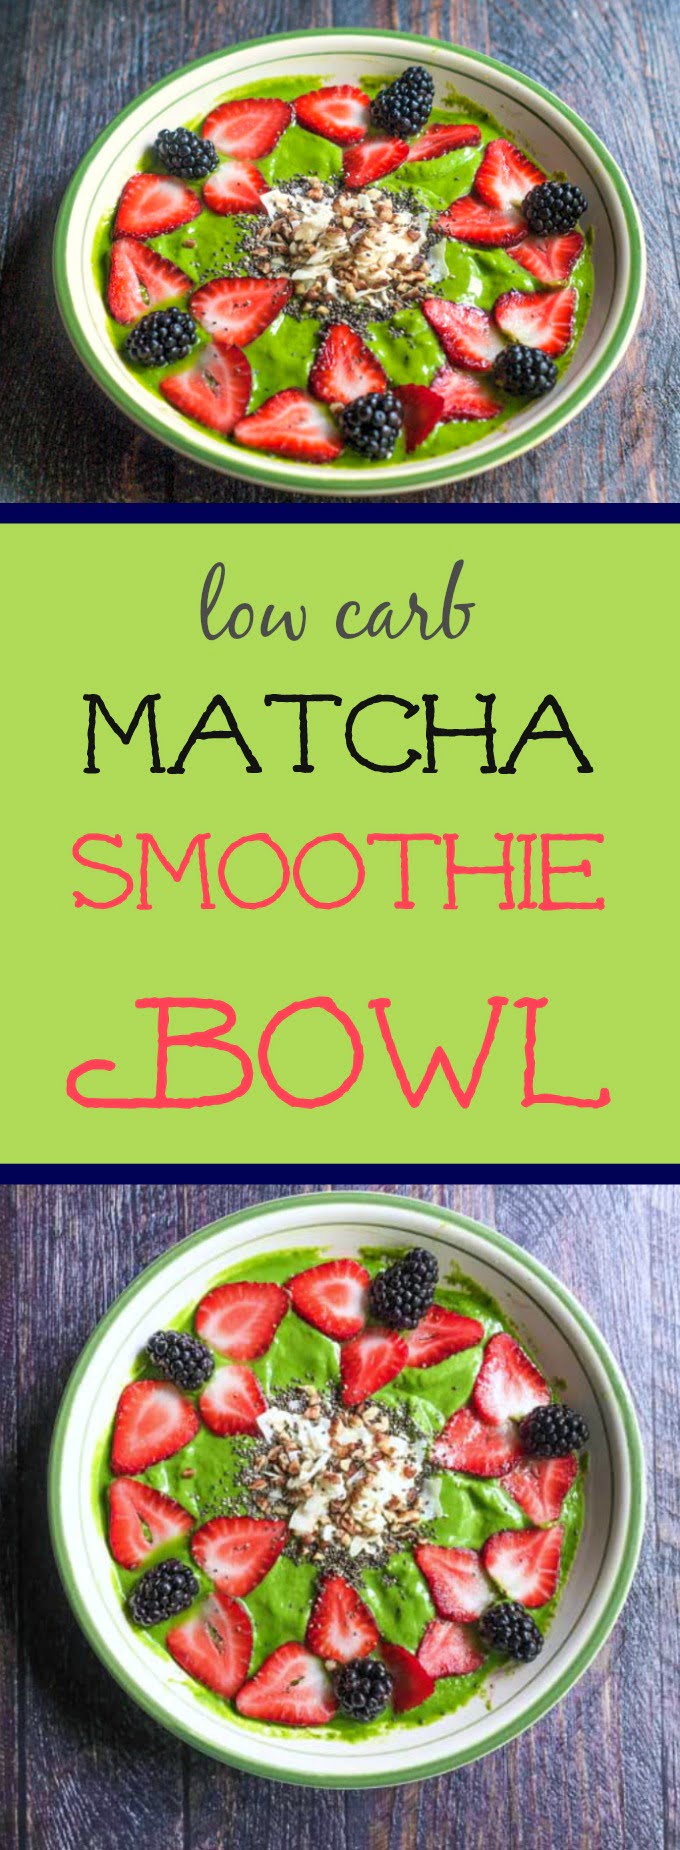 This low carb matcha smoothie bowl is the perfect dish to get you going in the morning. 